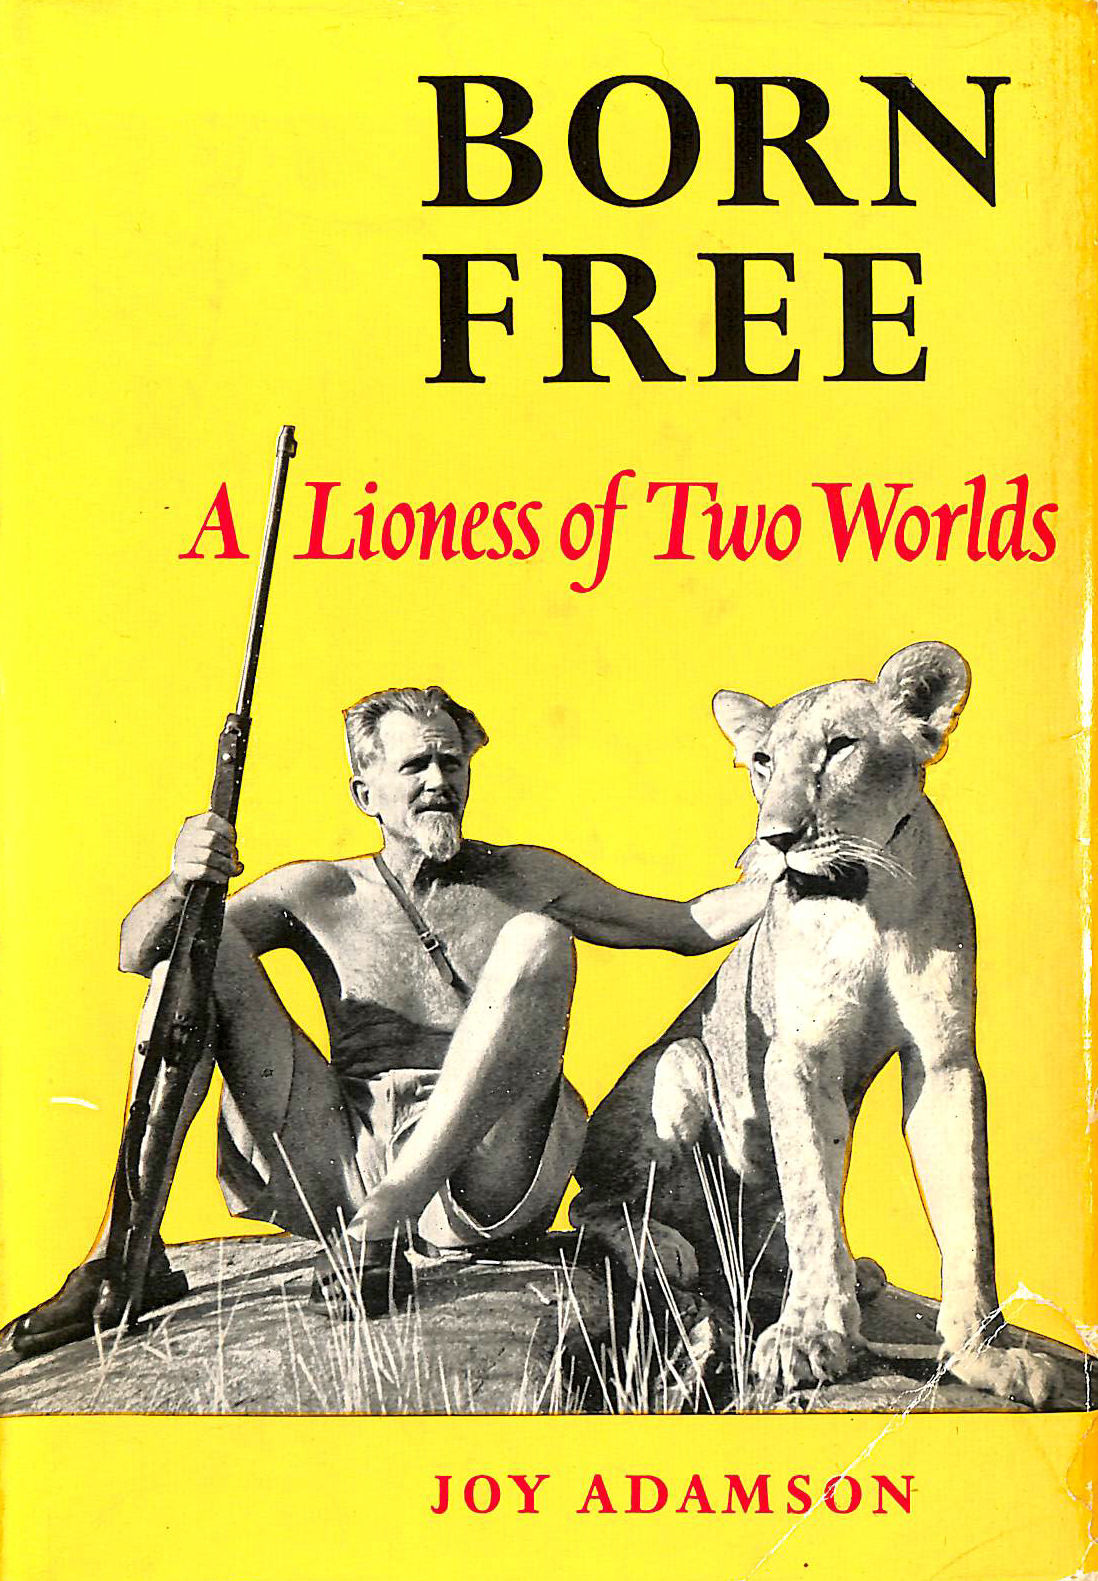 JOY ADAMSON - Born Free. A Lioness of Two Worlds.